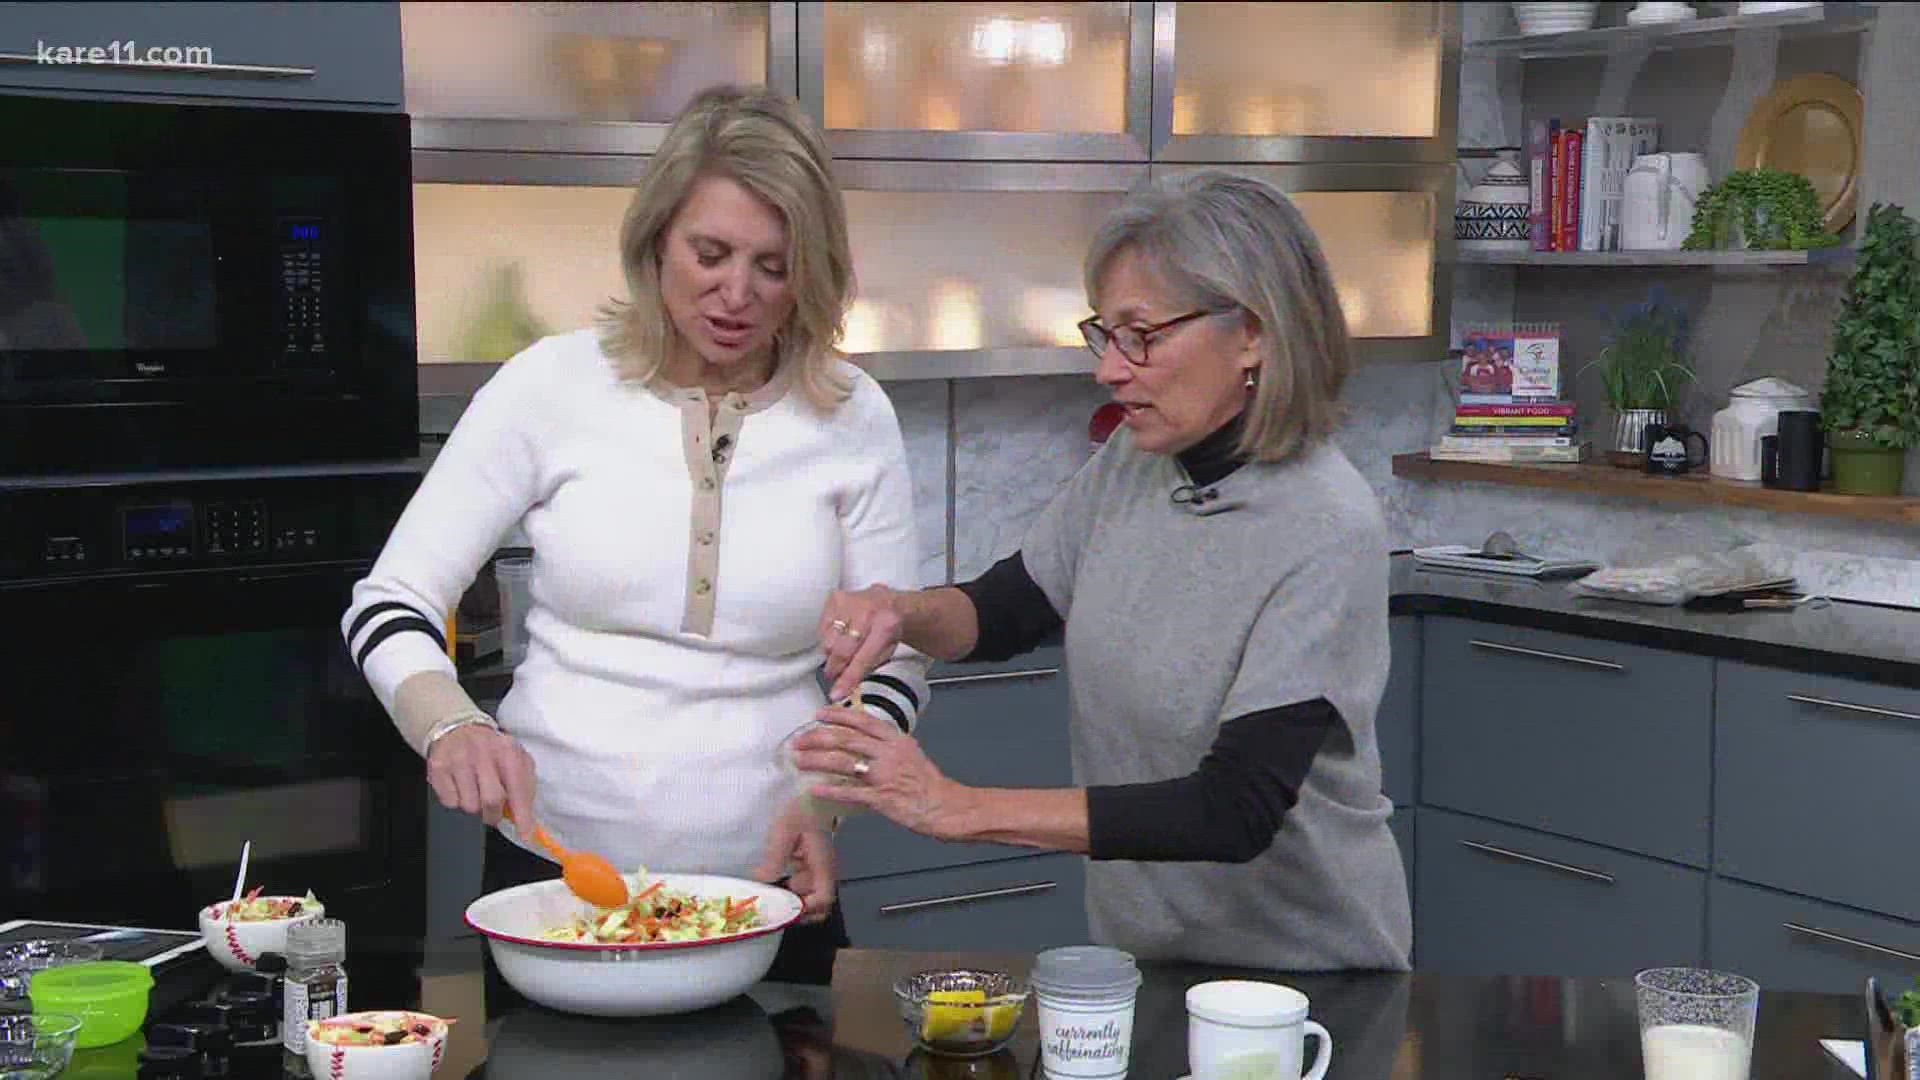 Sue Moores, a nutritionist for Kowalski's Market, explained during KARE 11 Saturday what foods can help people's skin stay healthy and glowing.